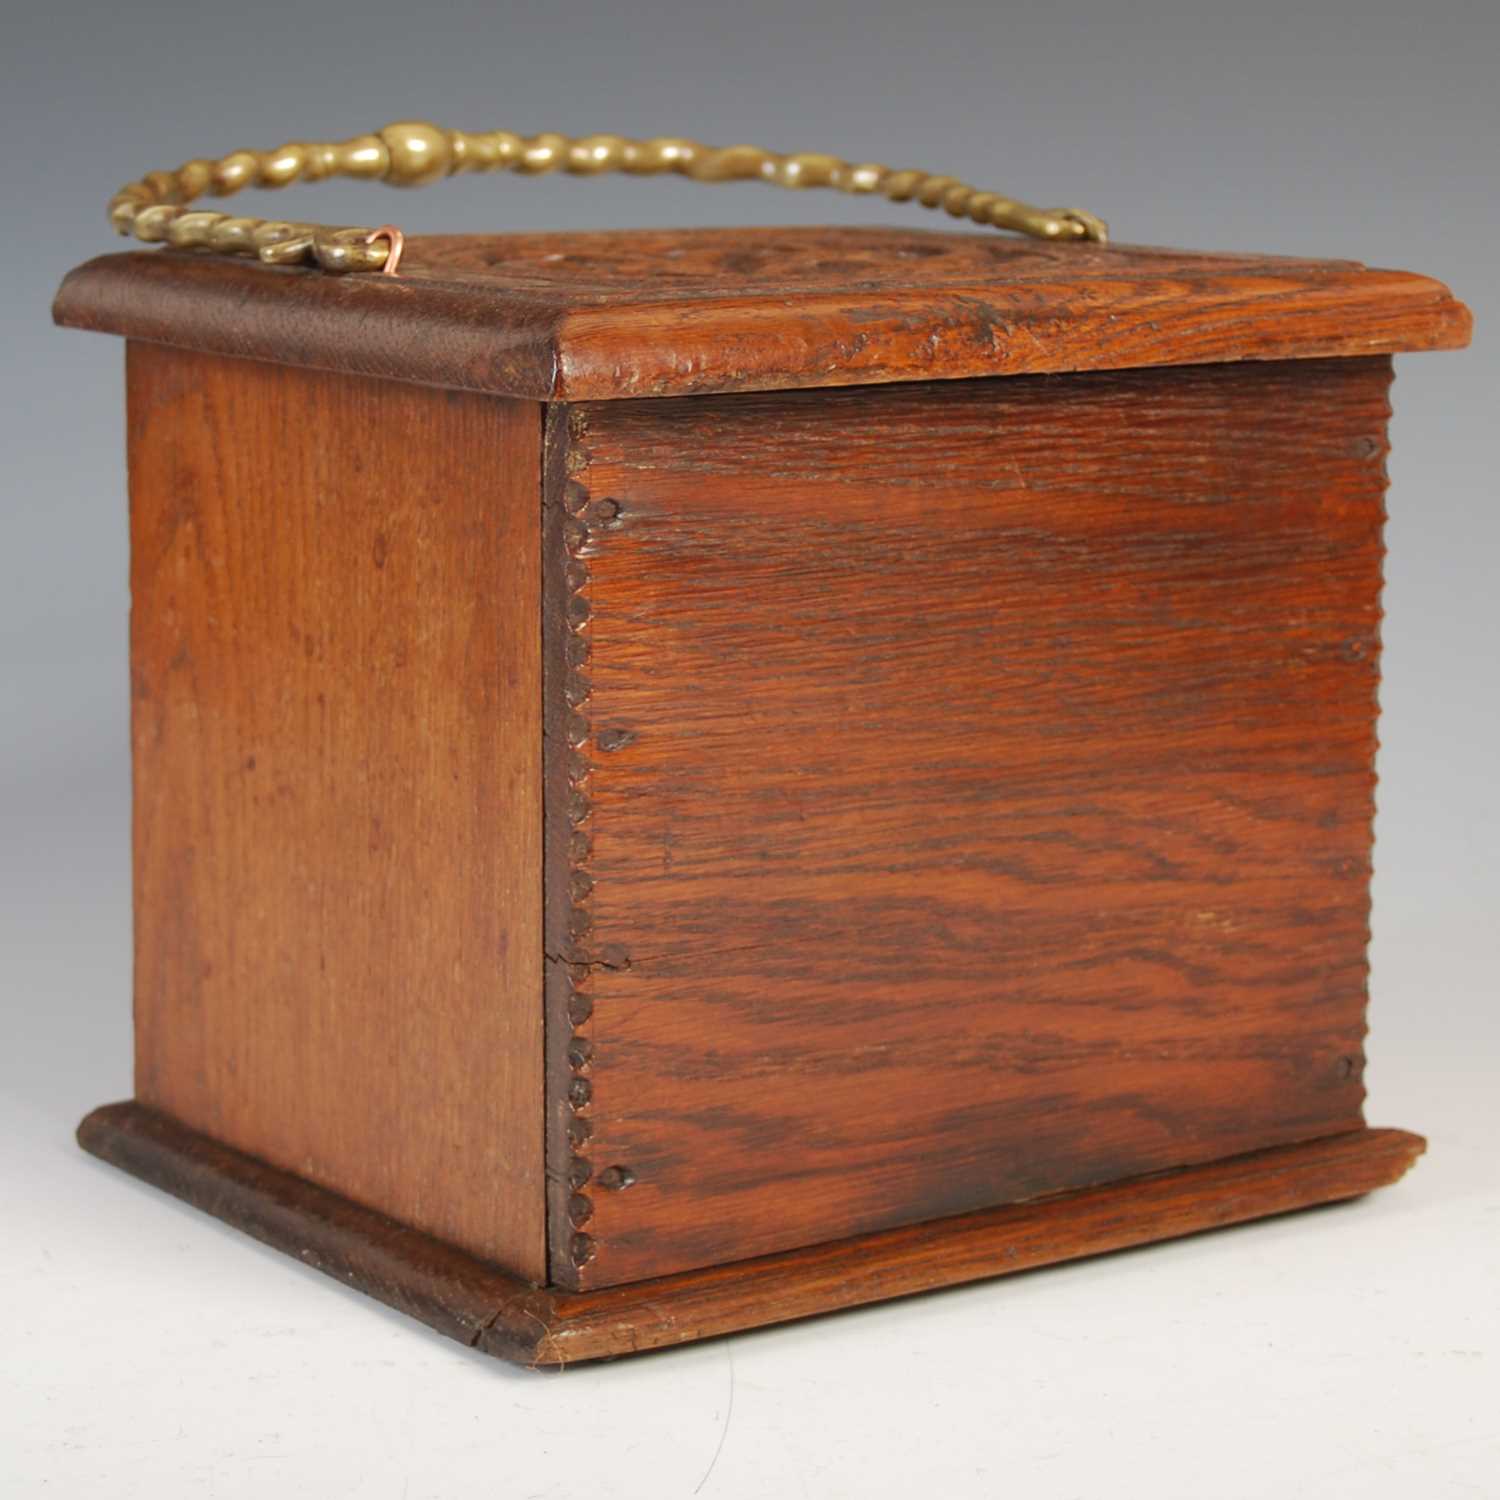 An early 19th century Dutch, Friesland, foot warmer, of rectangular form with top carved and pierced - Image 2 of 4